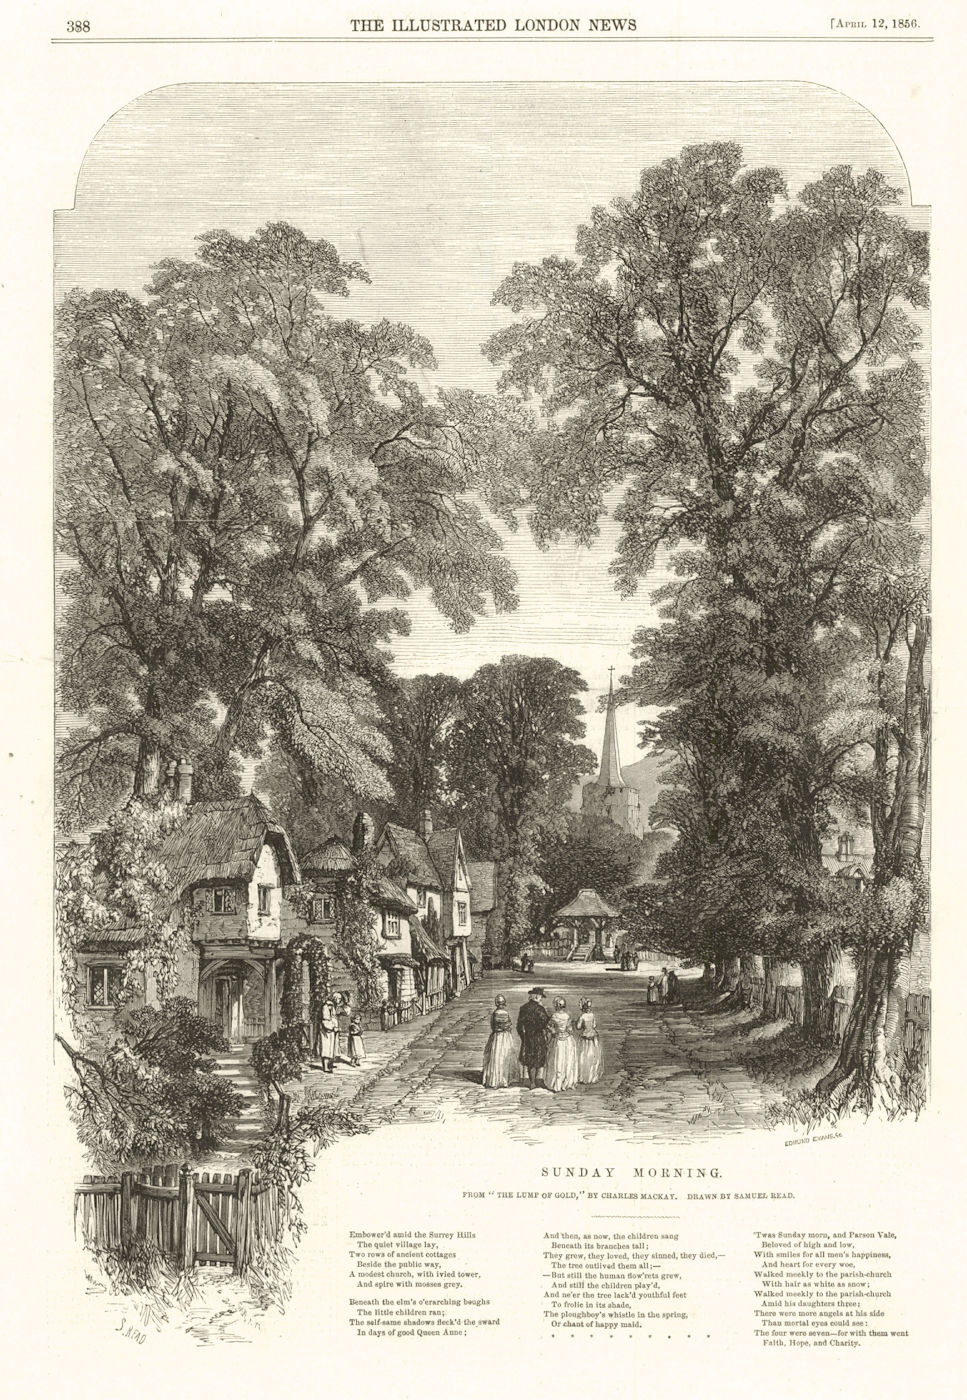 Sunday Morning. From "The Lump of Gold" by Charles Mackay. Surrey village 1856